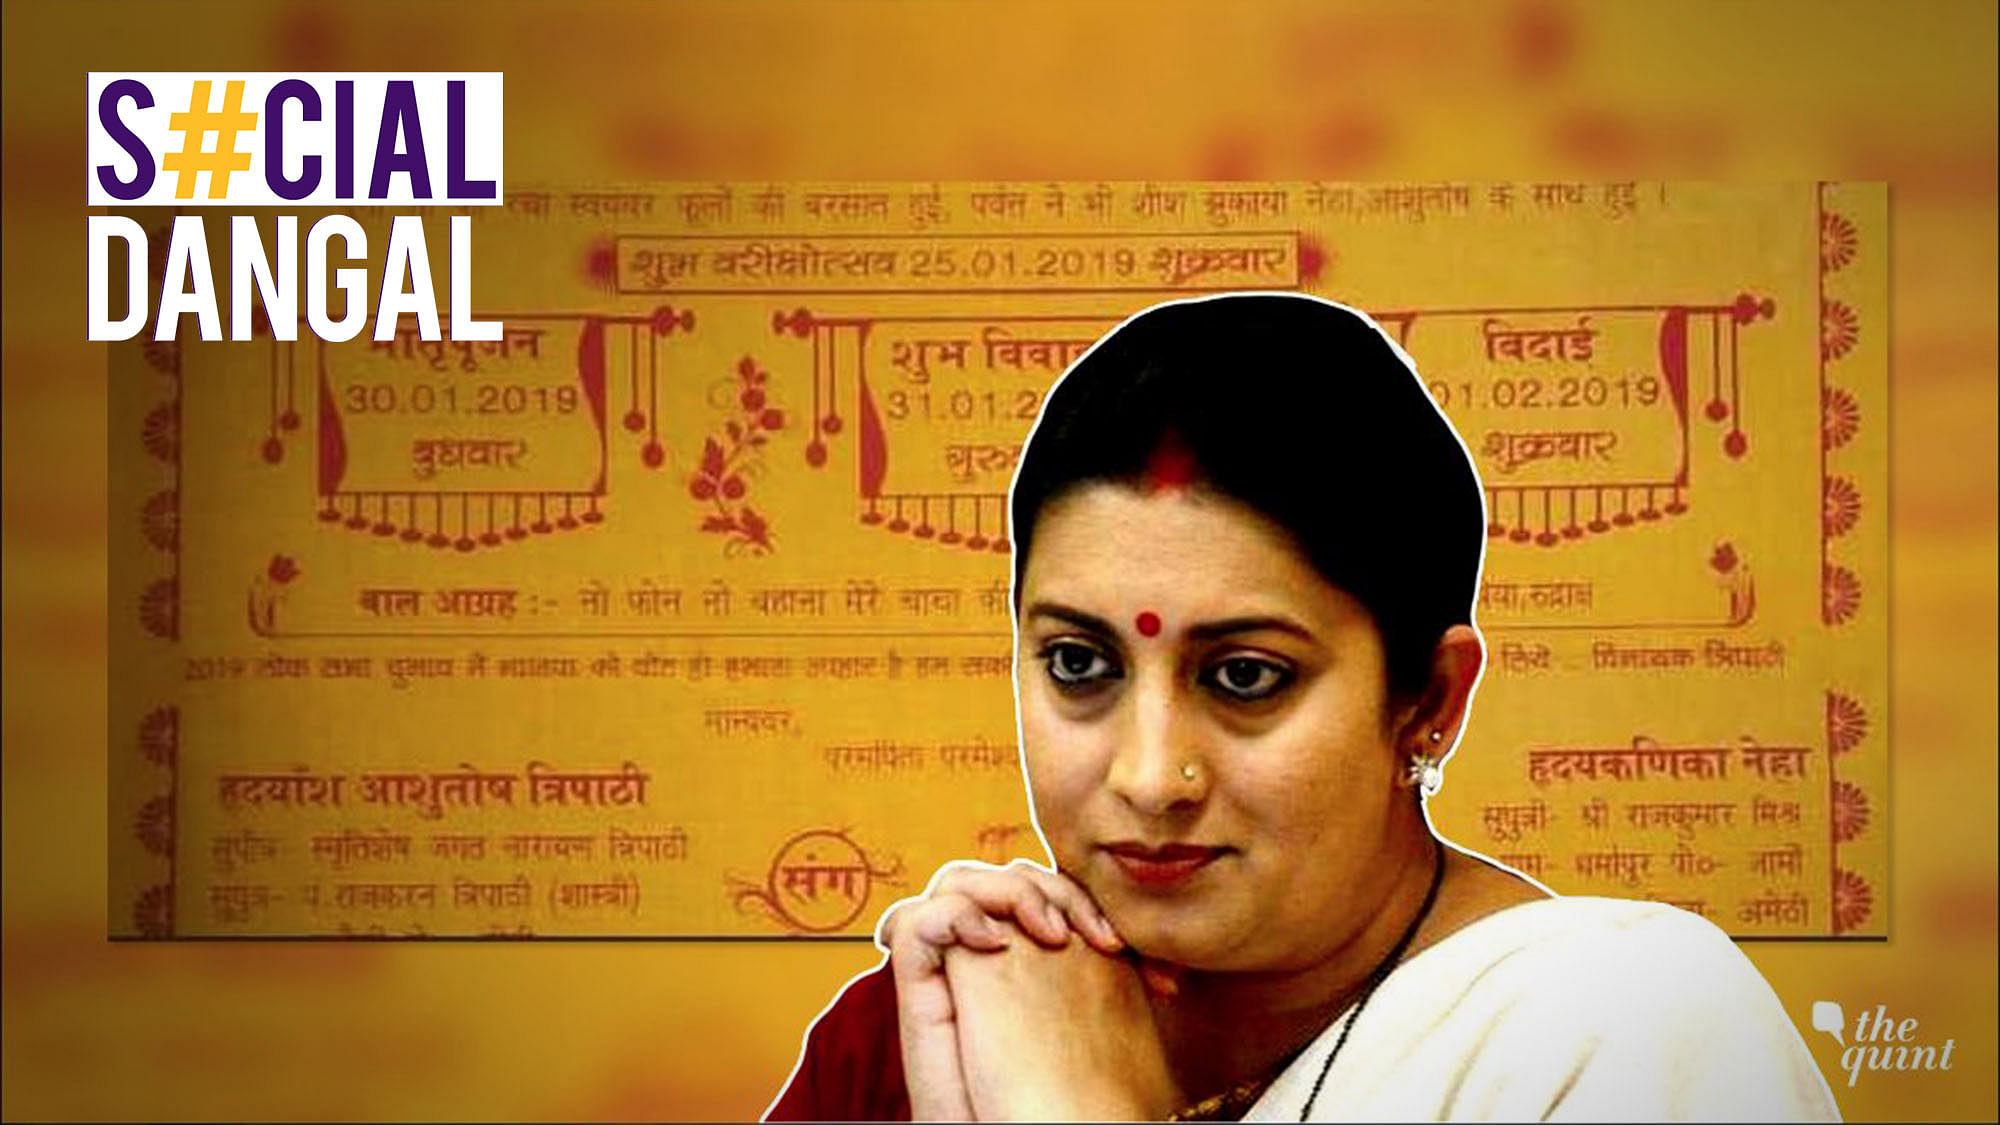 Union minister Smriti Irani retweeted a post of a wedding invitation that went viral on social media asking guests to ‘vote for BJP in 2019 general elections’ as a gift to the bride and groom.